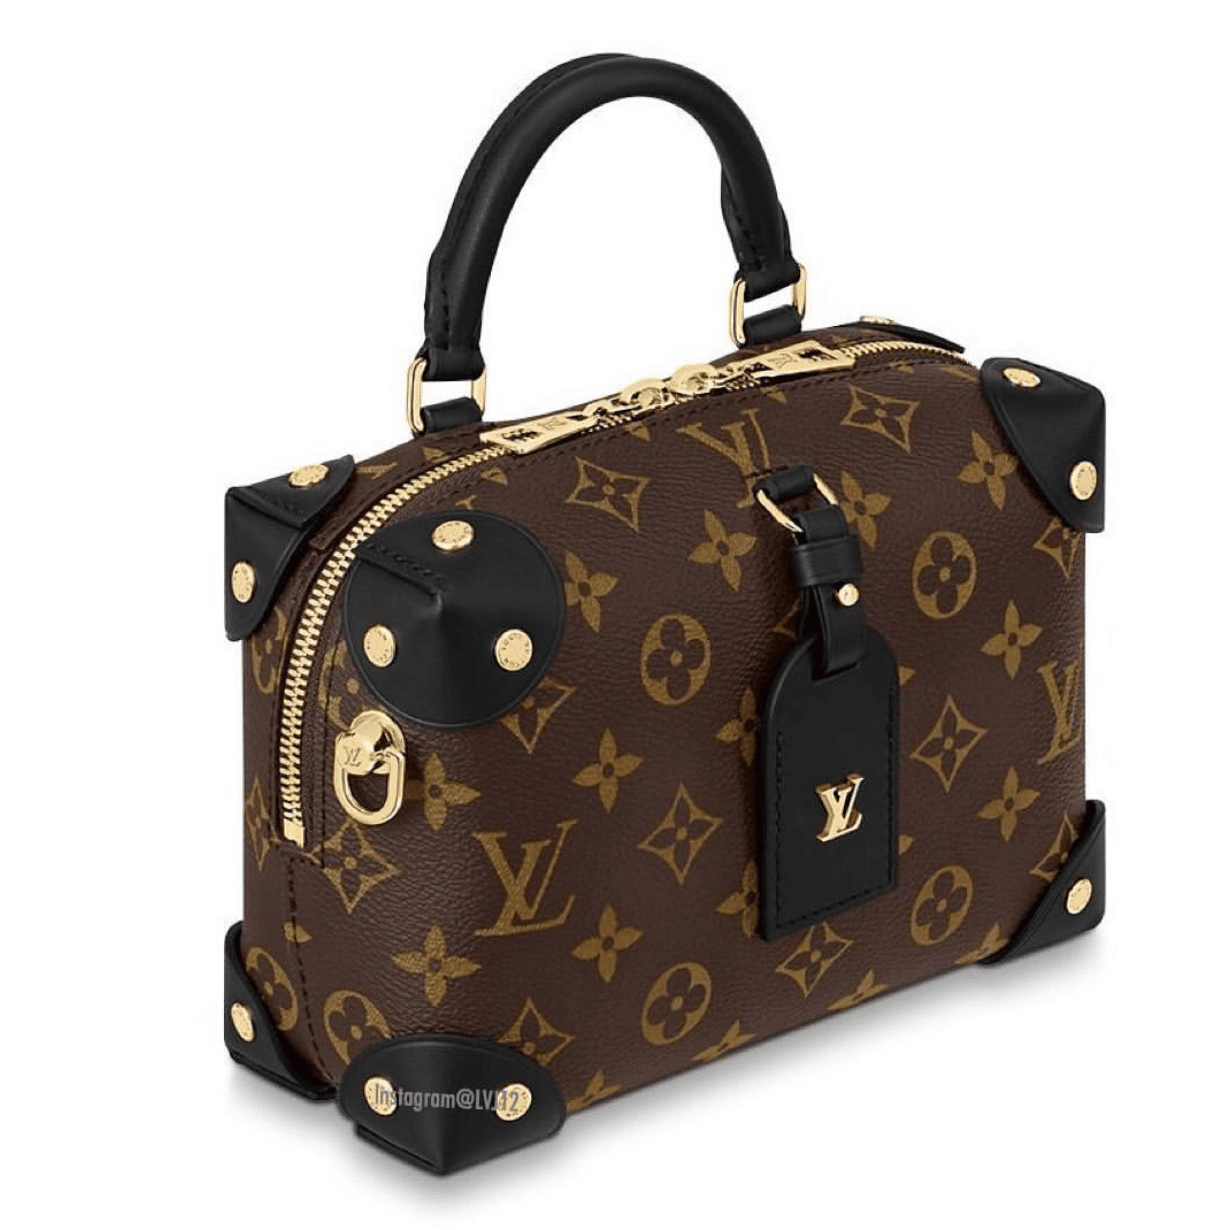 Louis Vuitton Petite Malle Souple Bag Reference Guide | Spotted Fashion